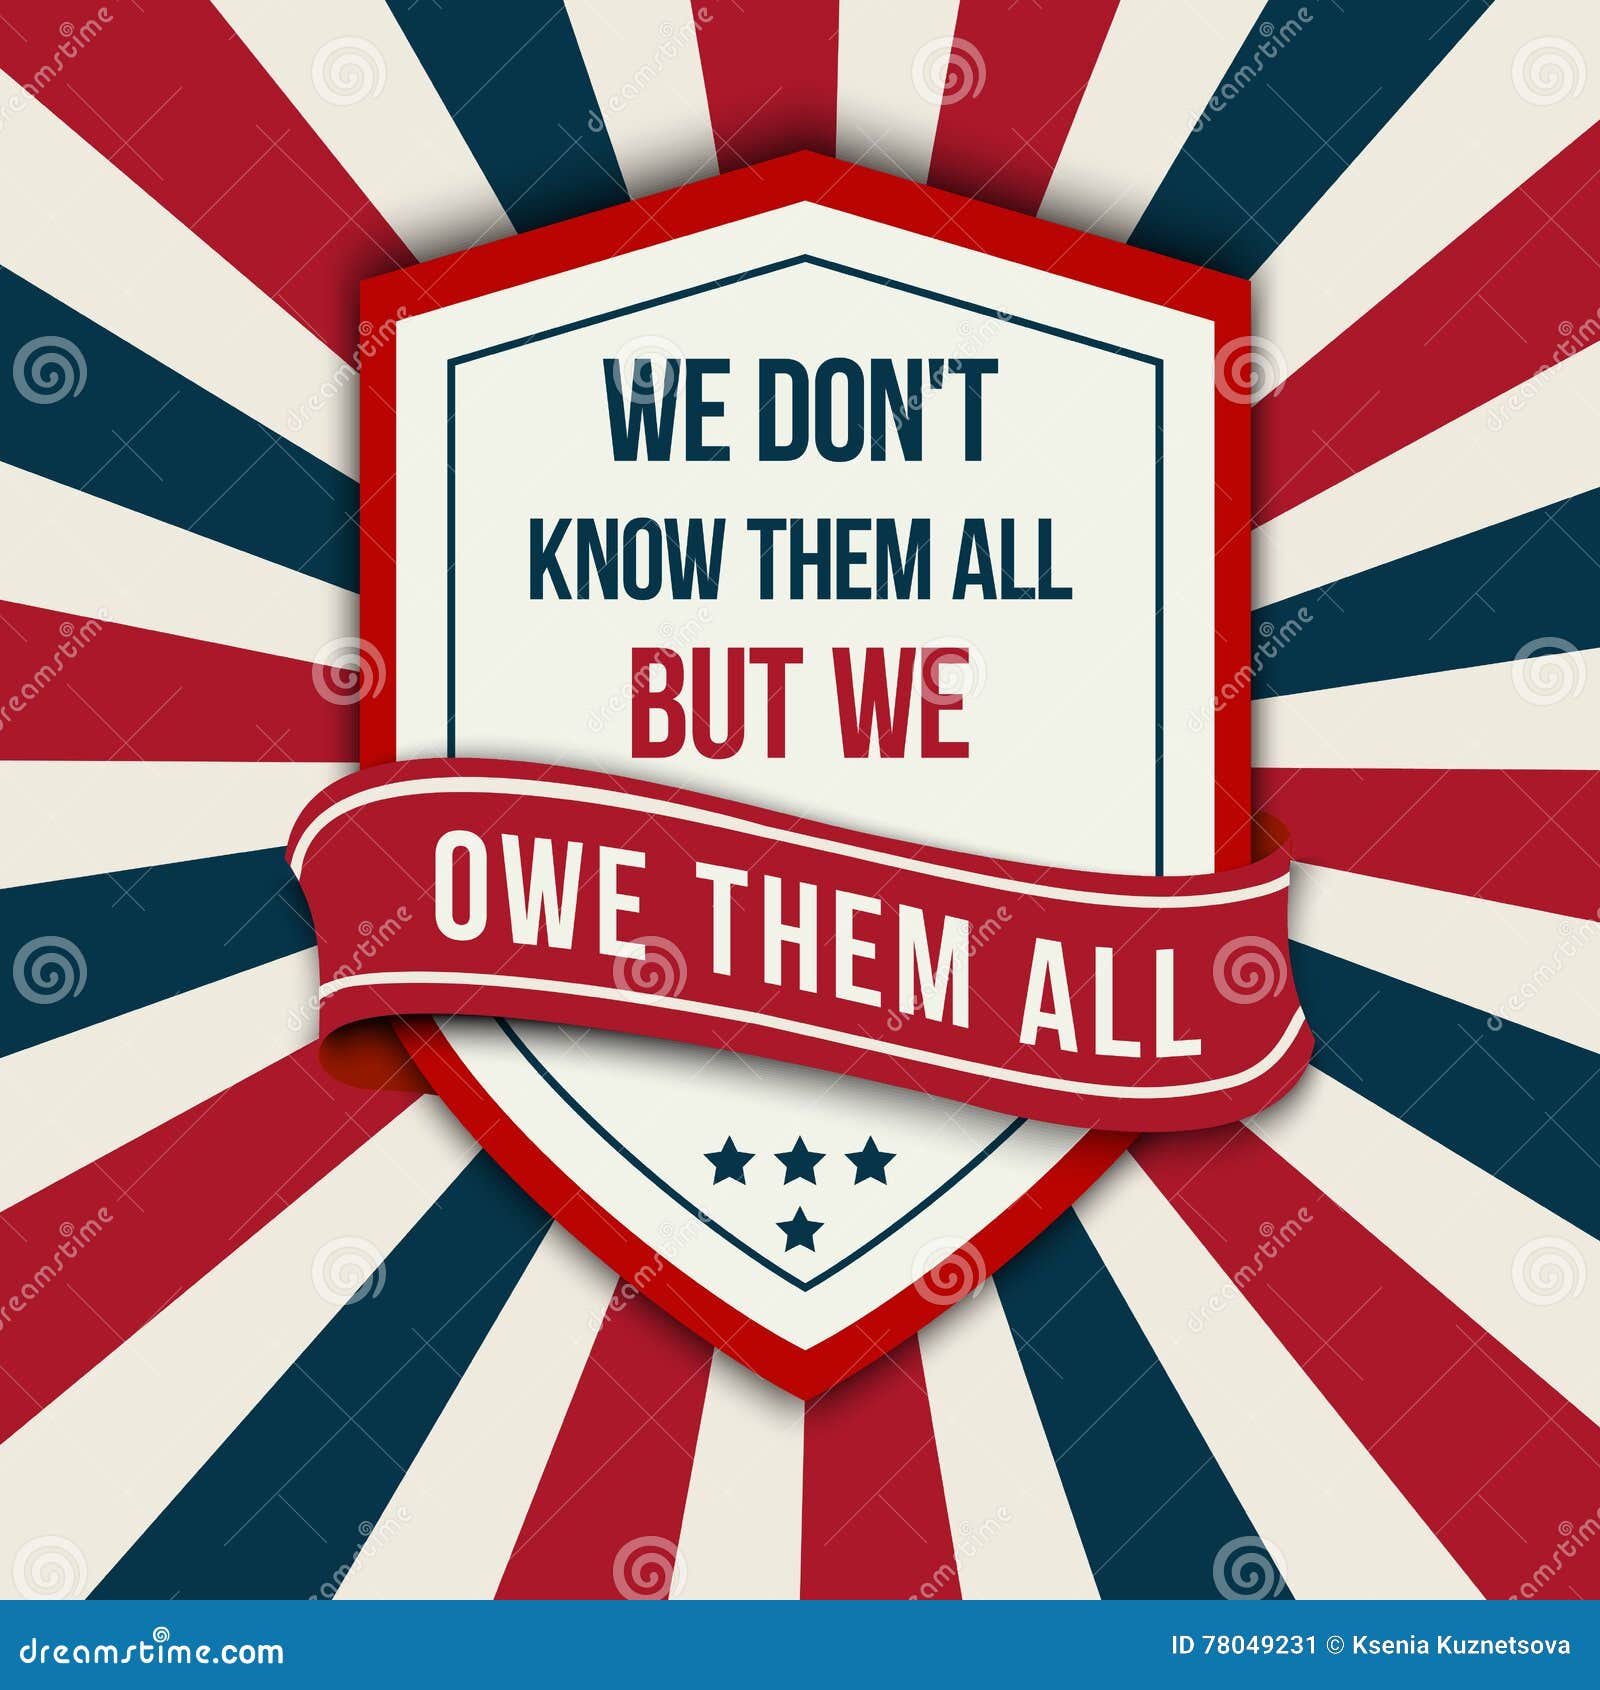  quote - we don t know them all. veterans day poster.